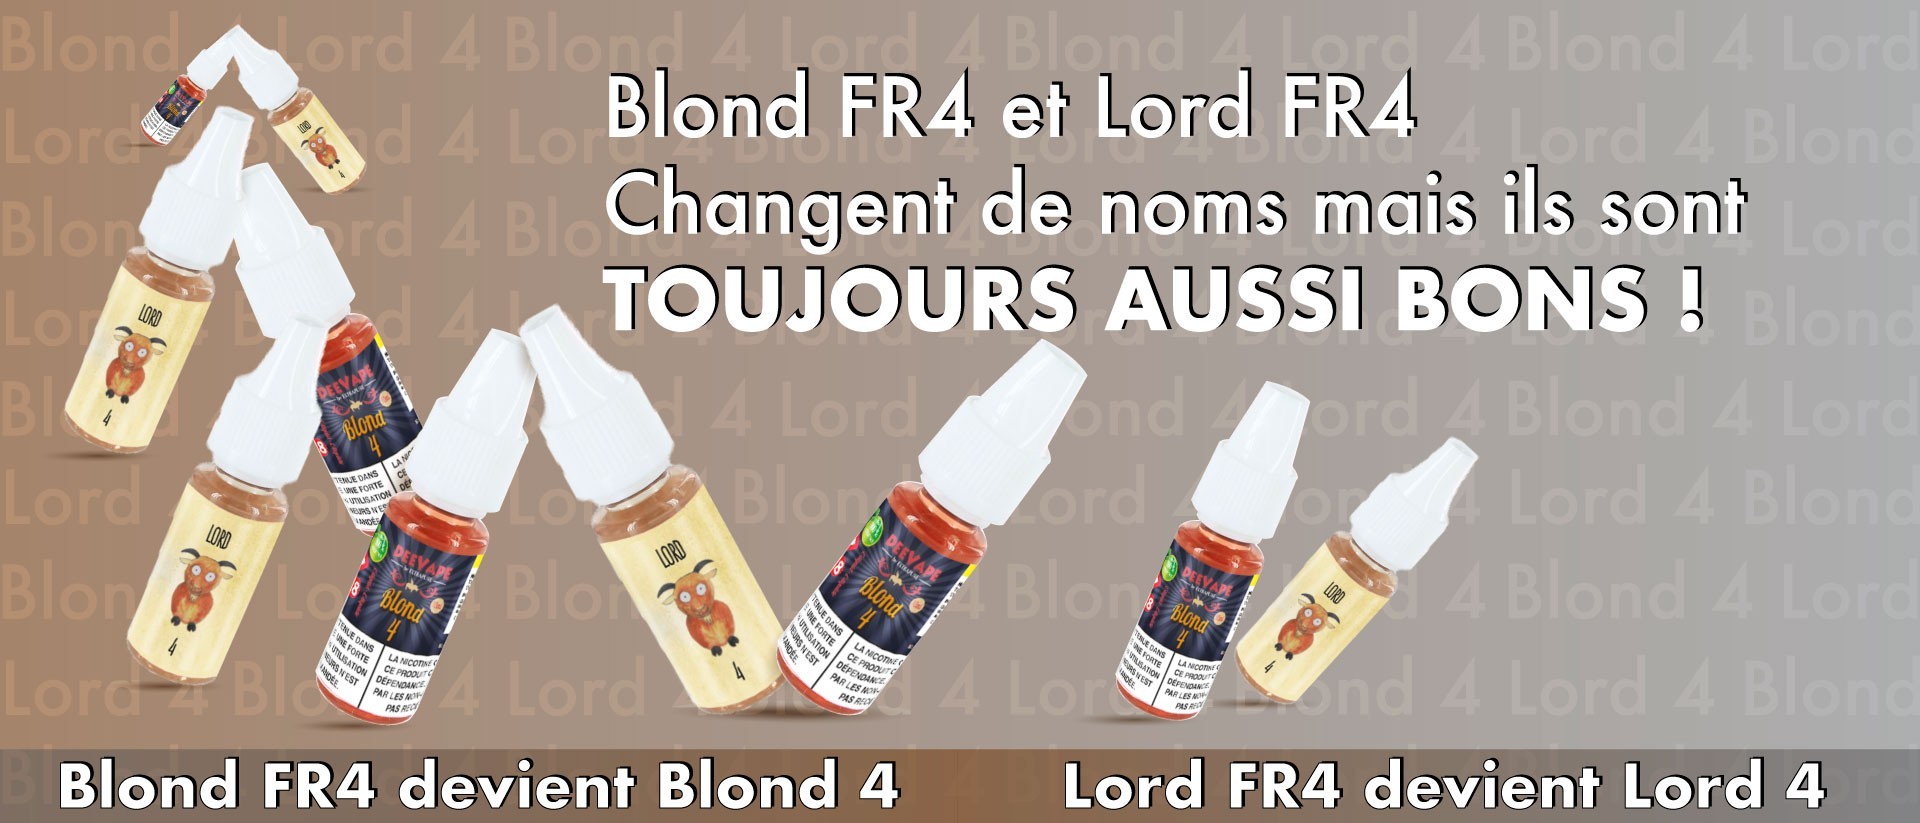 New Blond 4 - Lord 4